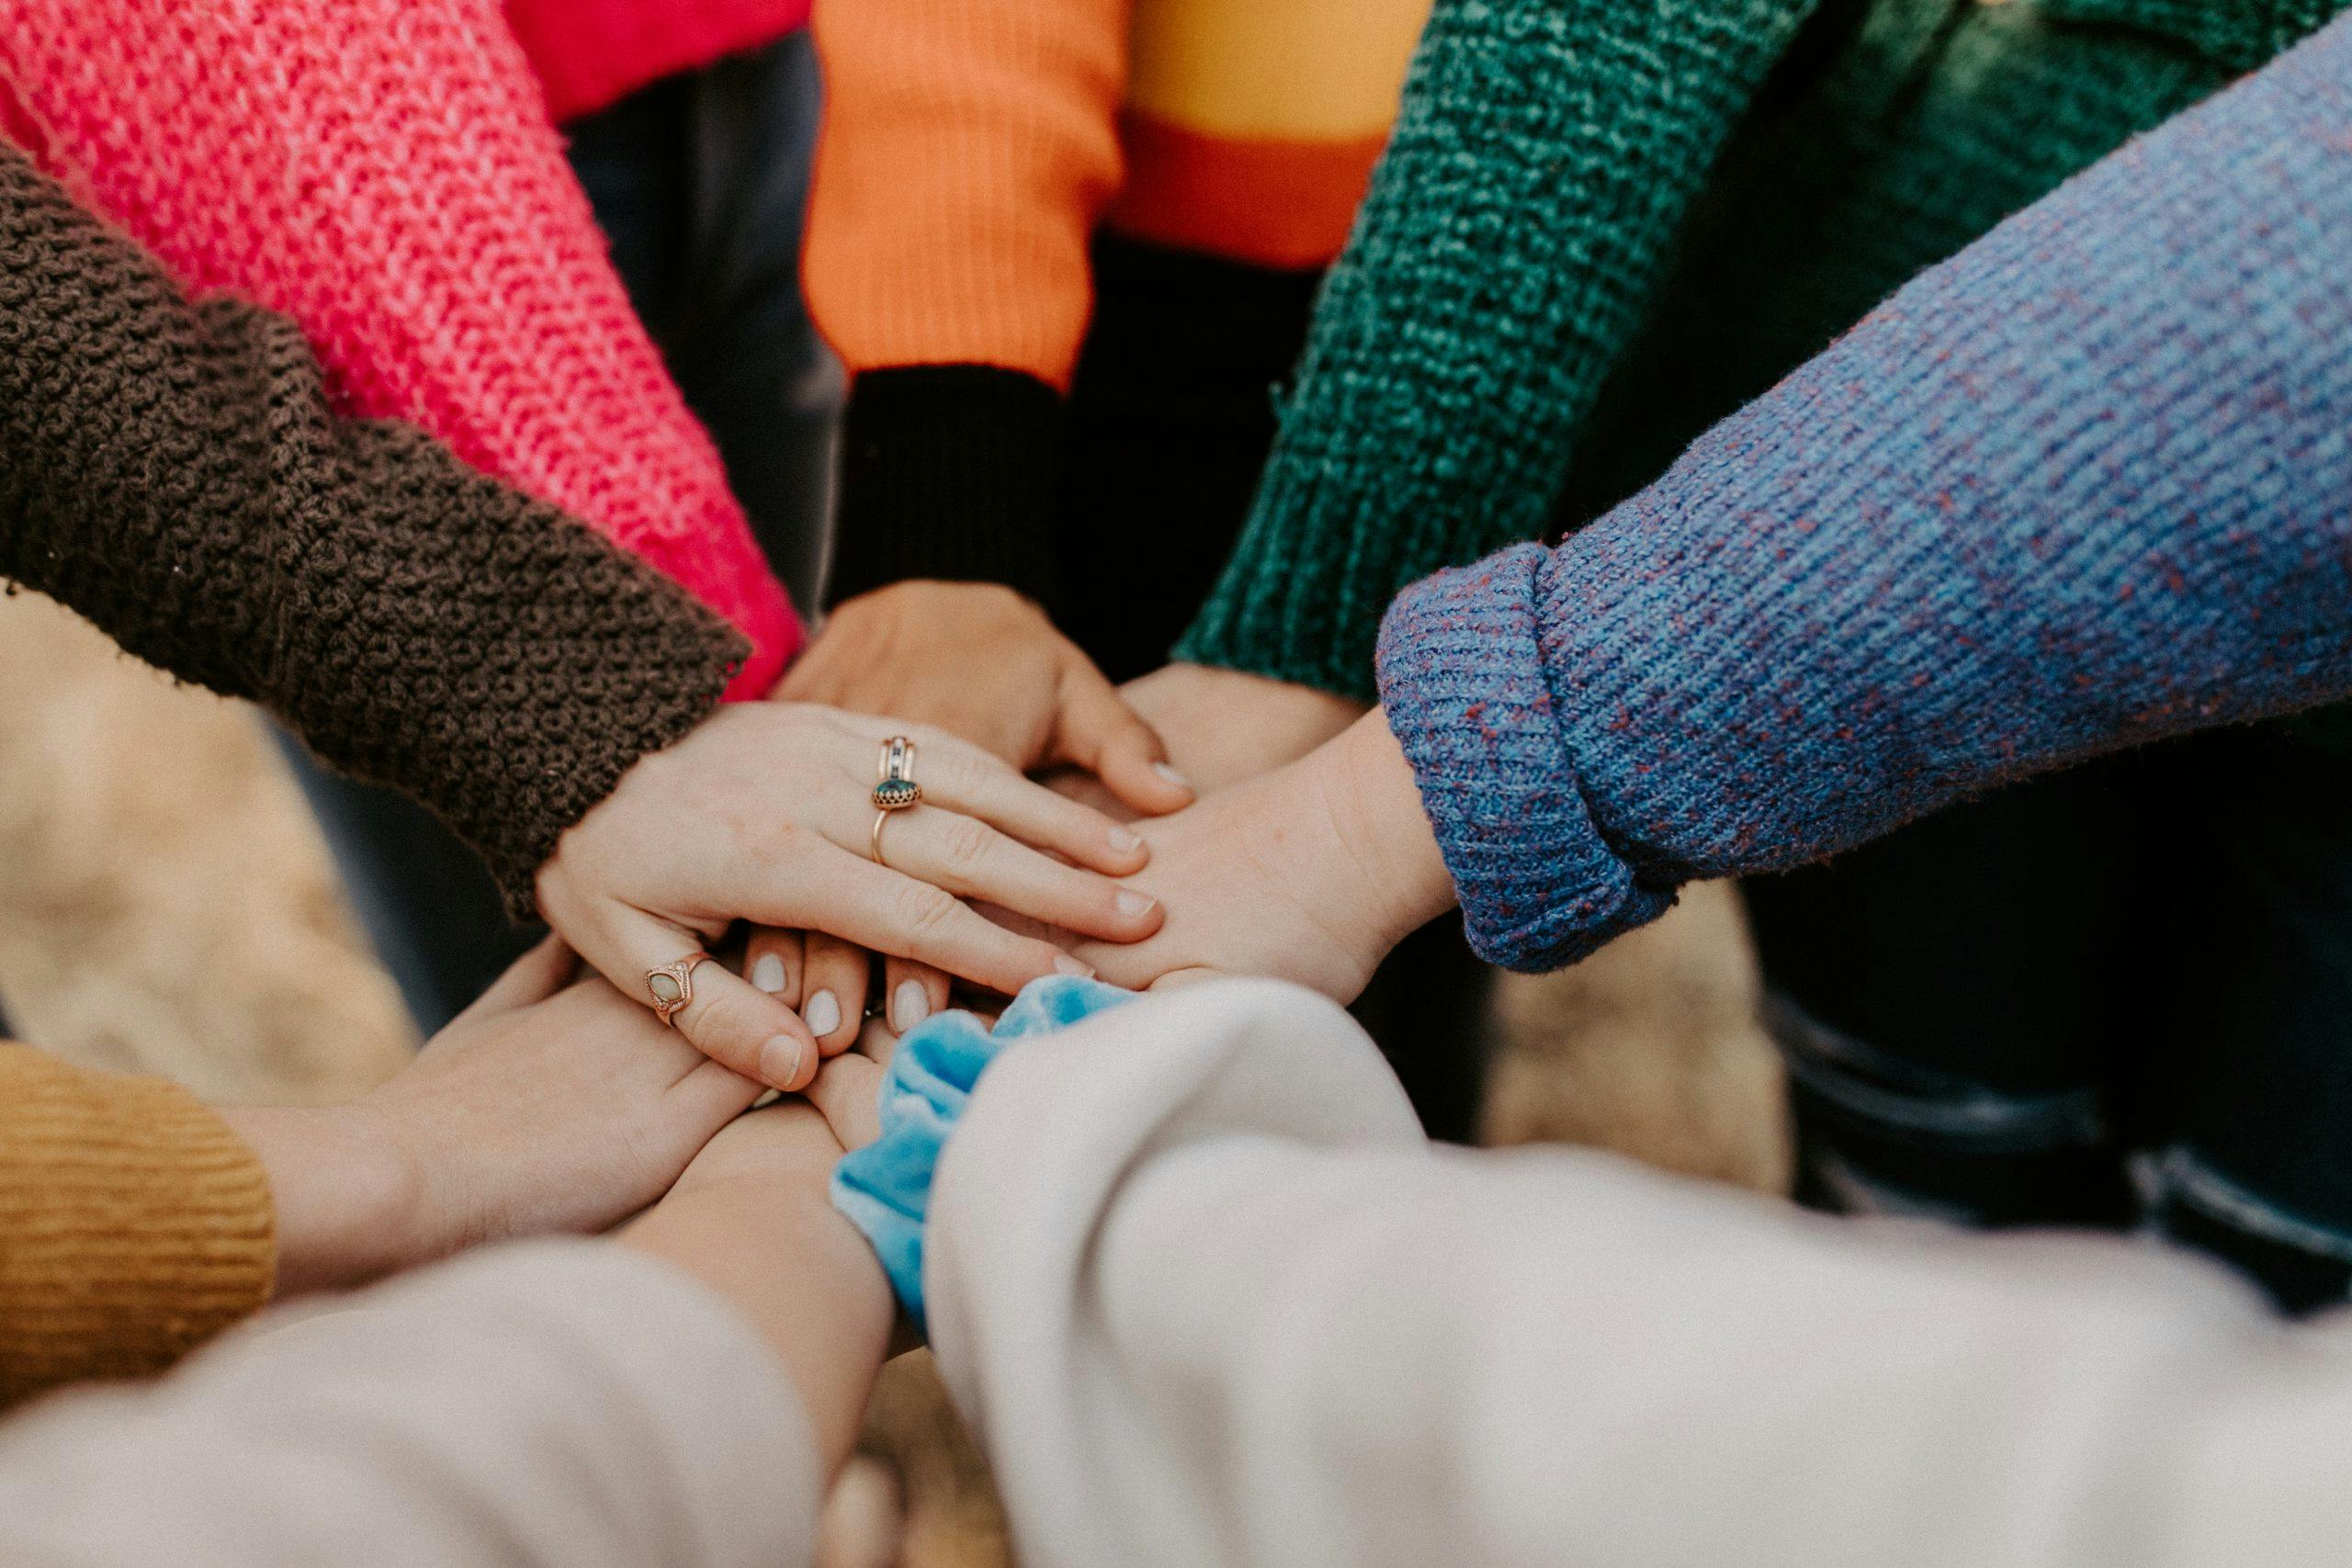 People in colorful sweaters gather hands for a huddle.